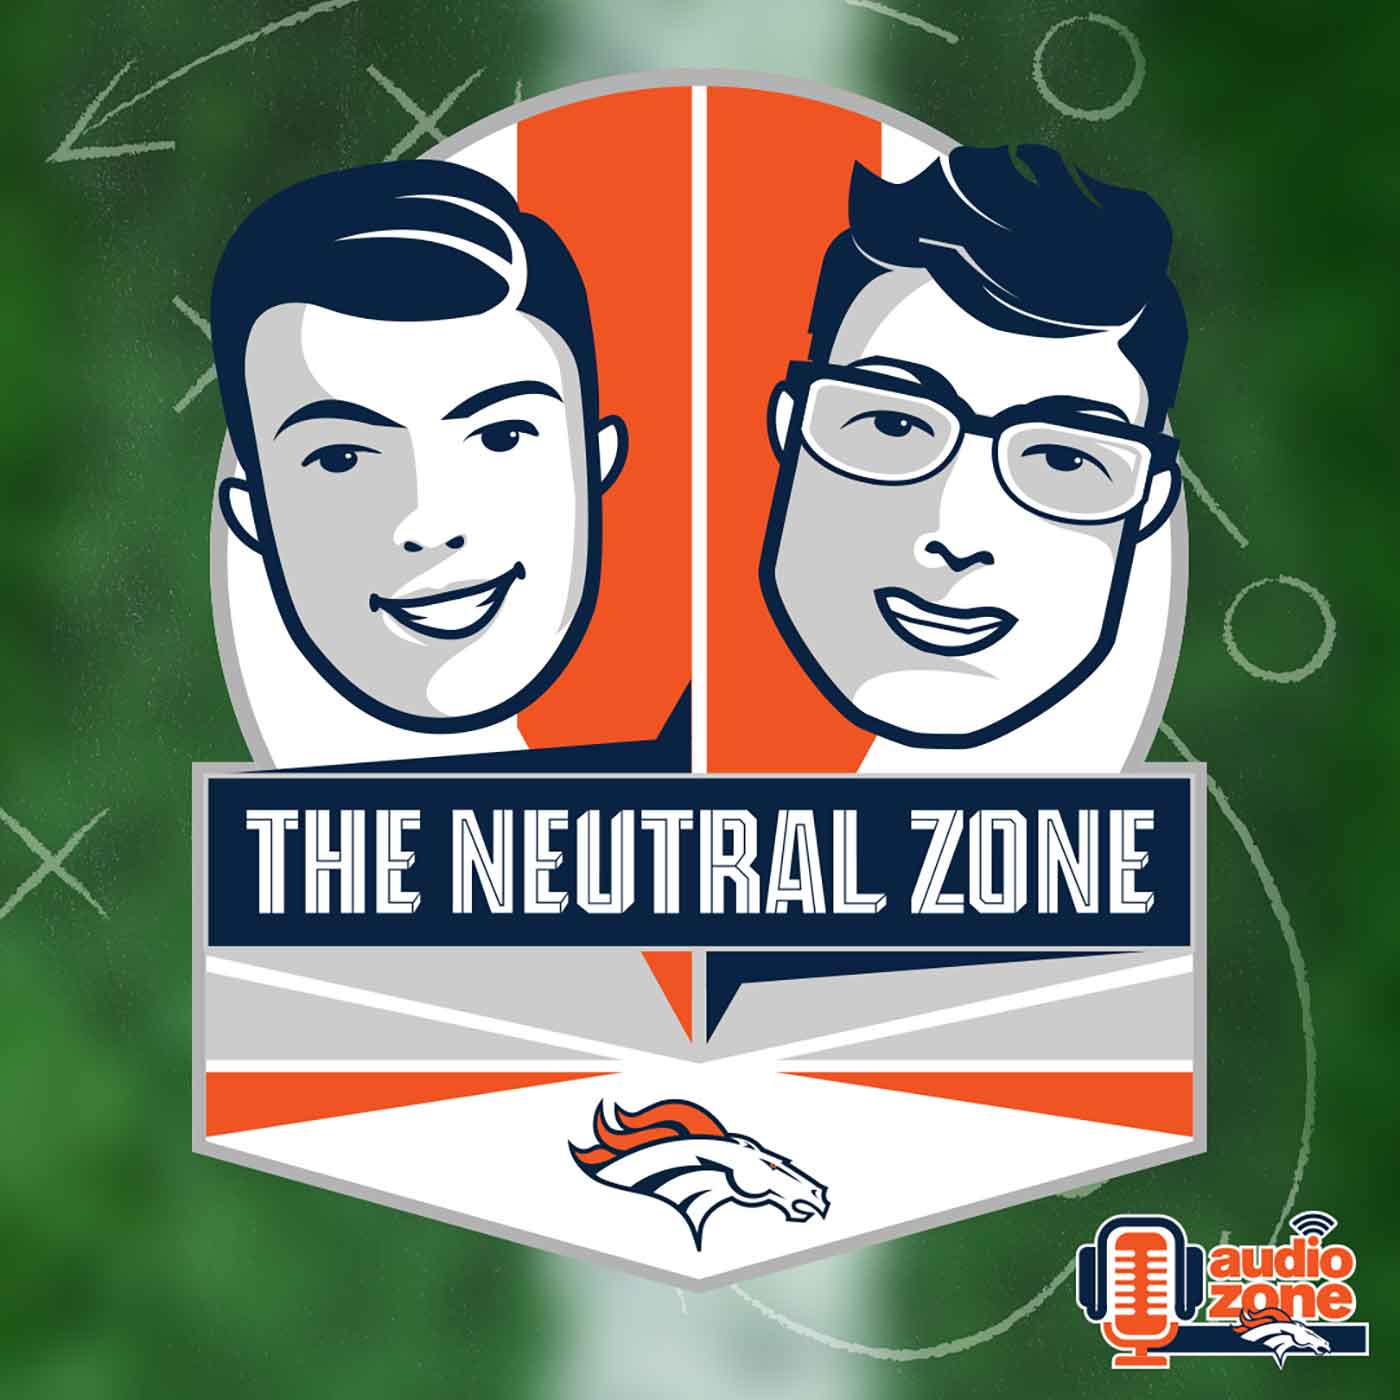 The Neutral Zone (Ep. 166): Are the Broncos legit after starting 2-0?